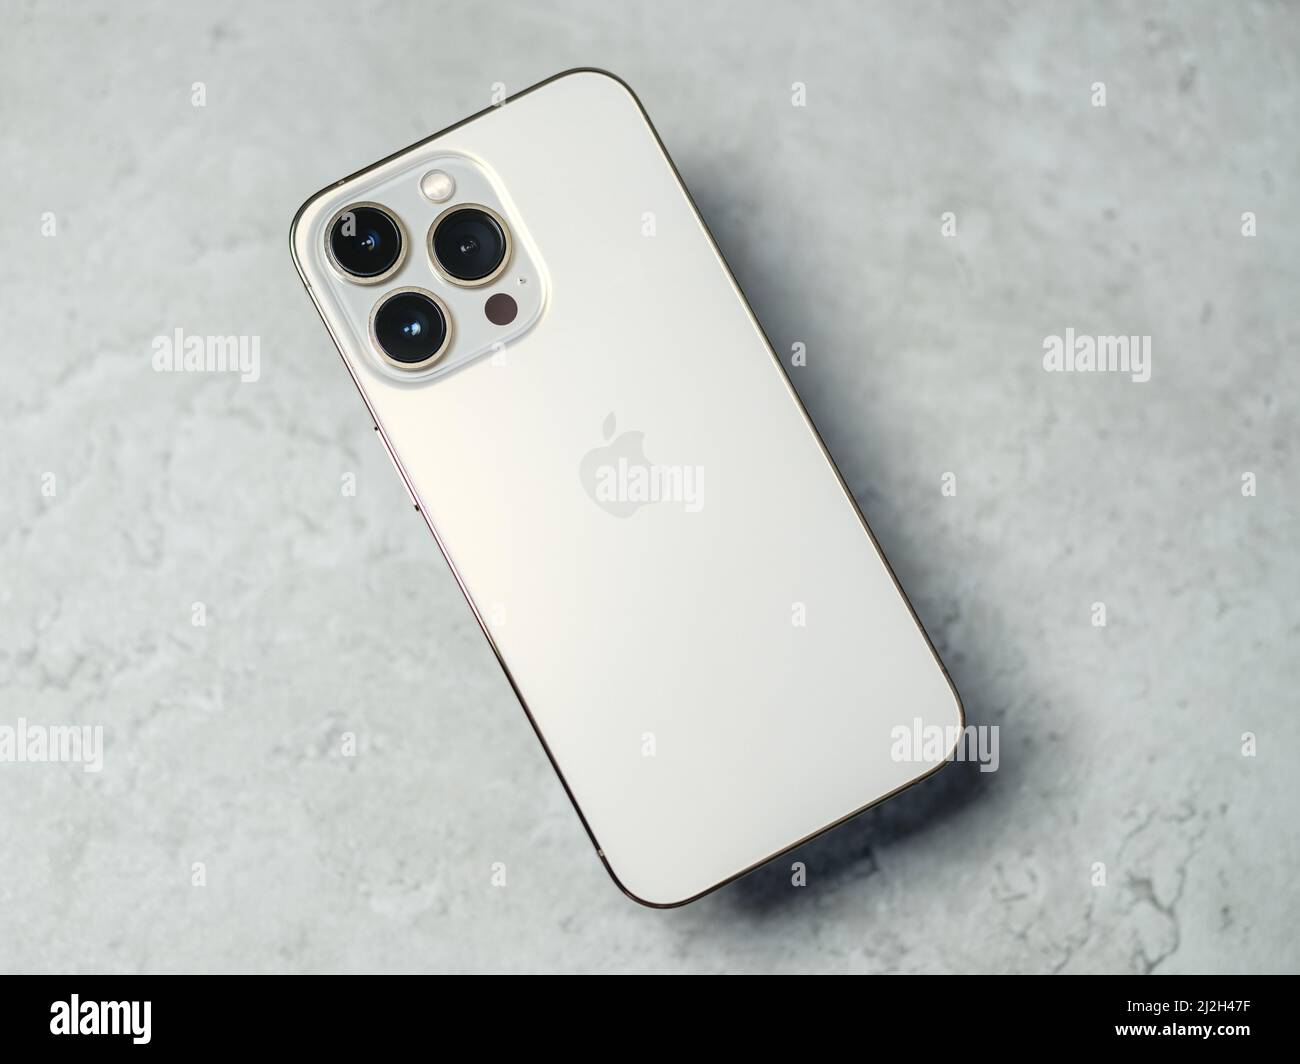 HCMC, Vietnam - August 19, 2021: View of new iPhone 13 or iPhone 13 Pro and Apple Airpods for editorial use Stock Photo